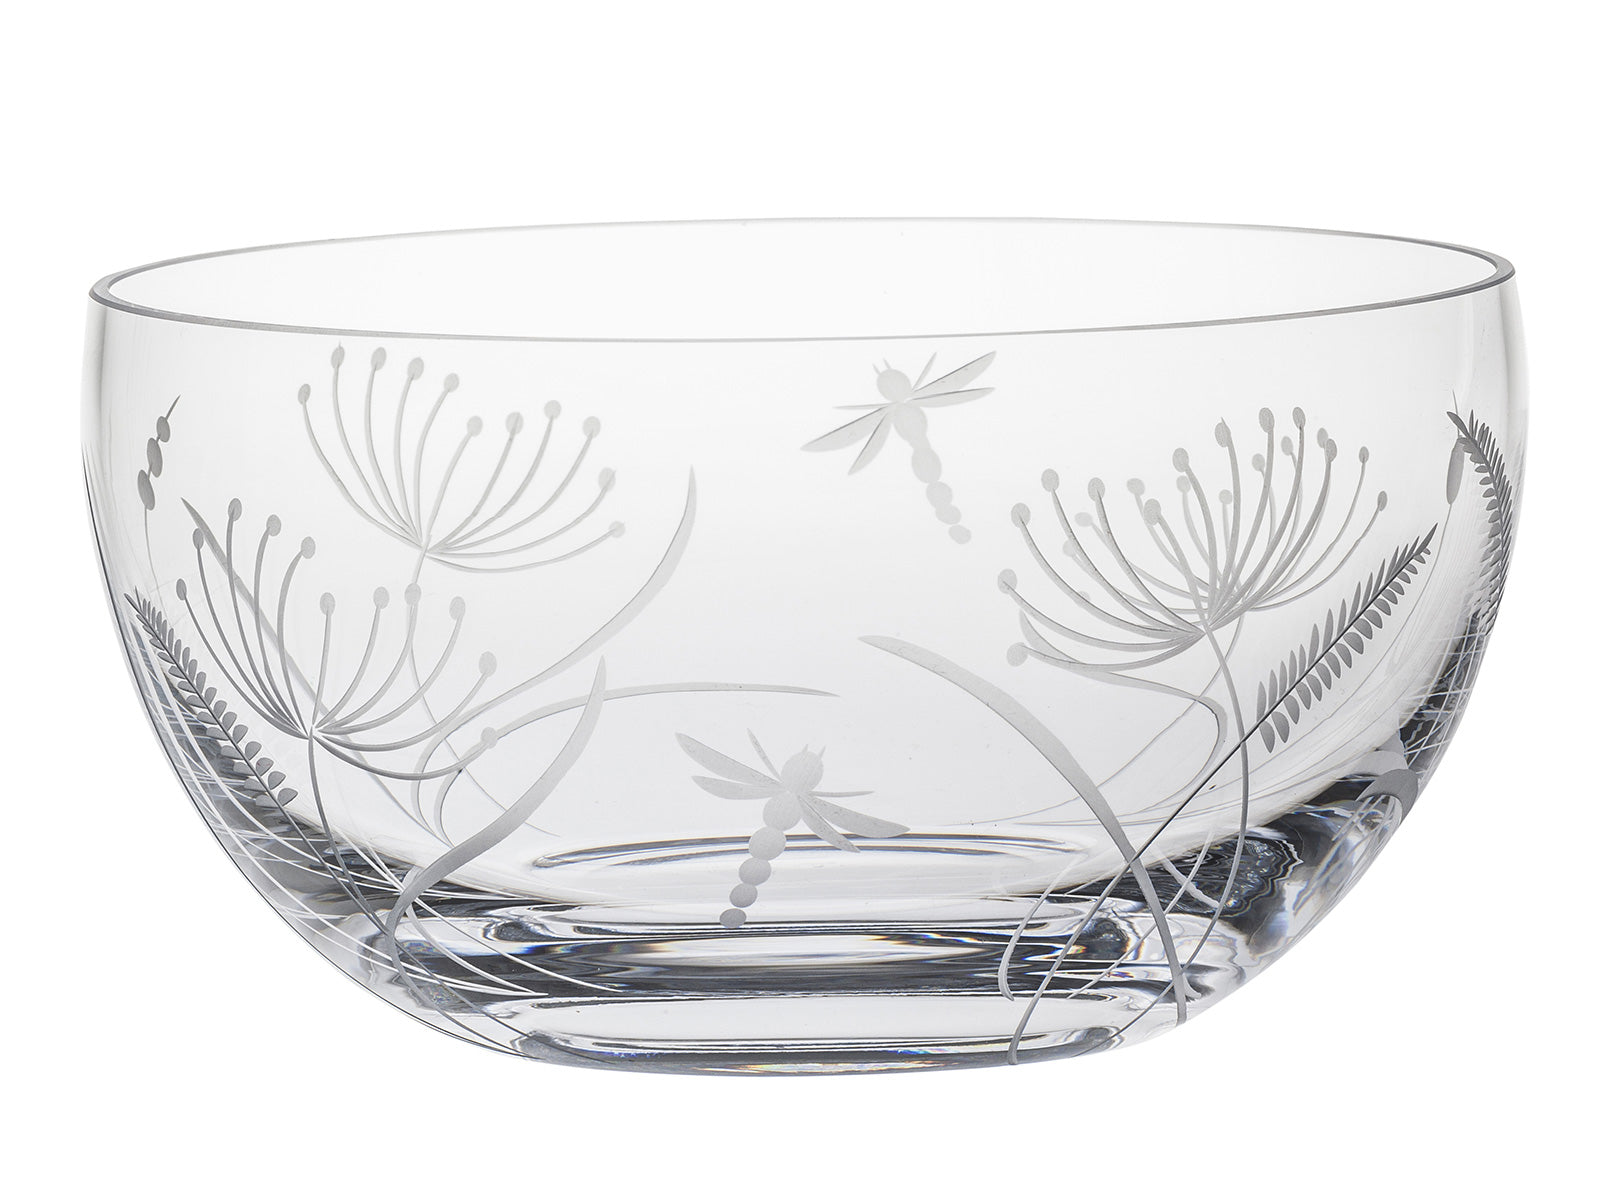 Royal Scot Crystal Dragonfly Bowl - Fruit / Salad is engraved with the signature Sanderson print of dragonflies amongst a field of dandelions and bulrushes. Crafted from crystal and hand-cut in Britain, this large serving bowl is the perfect gift for a new home owner.